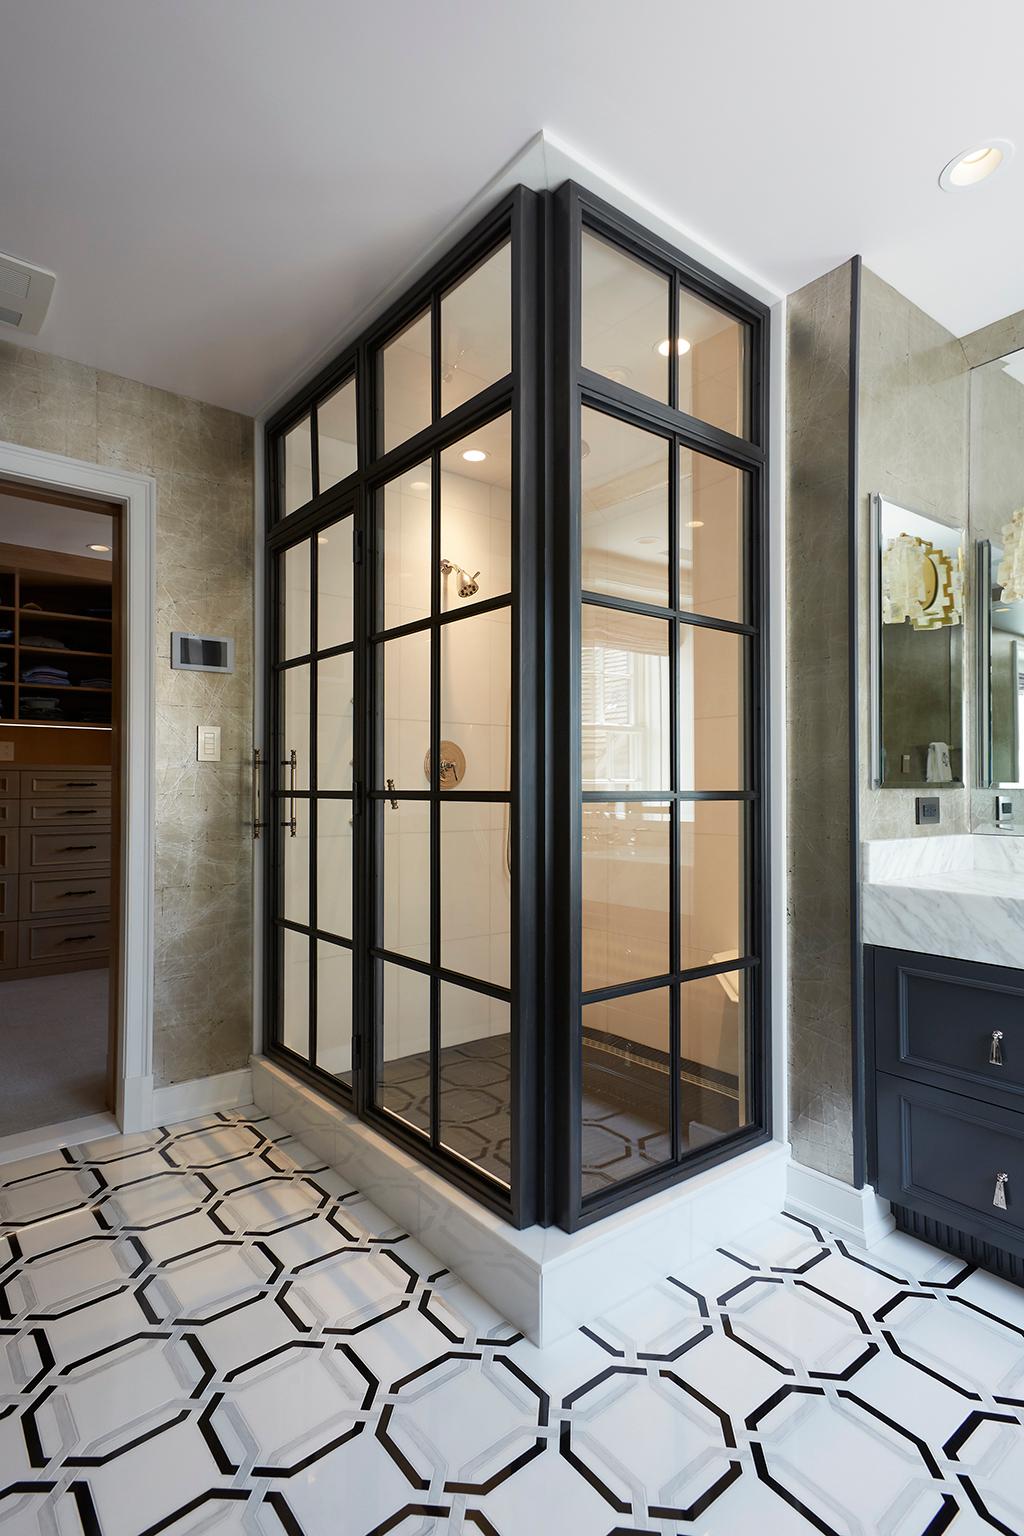 Inspired by vintage factory windows and our Frankford Panel System, this industrial custom shower enclosure includes operable transom and custom machined bronze door pulls.

The base material is stainless steel to eliminate the possibility of